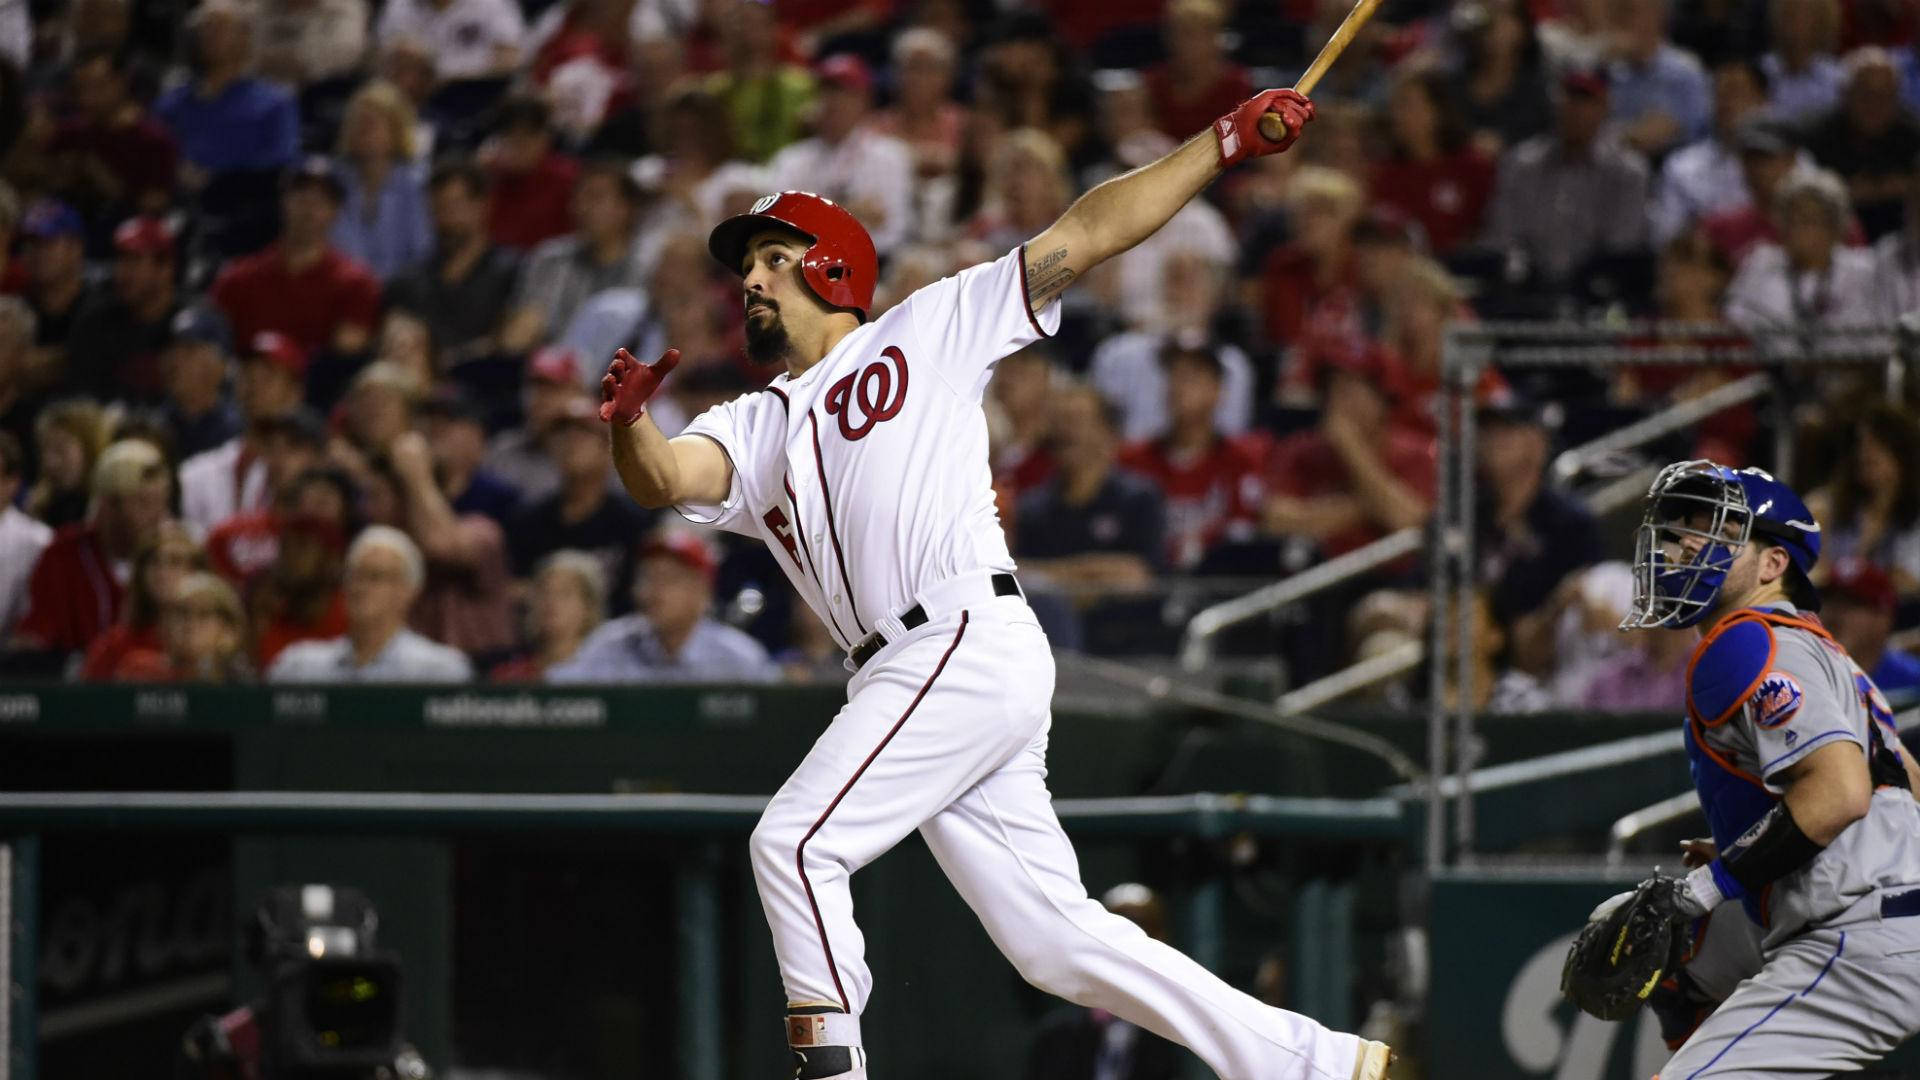 Anthony Rendon Running While Holding A Bat